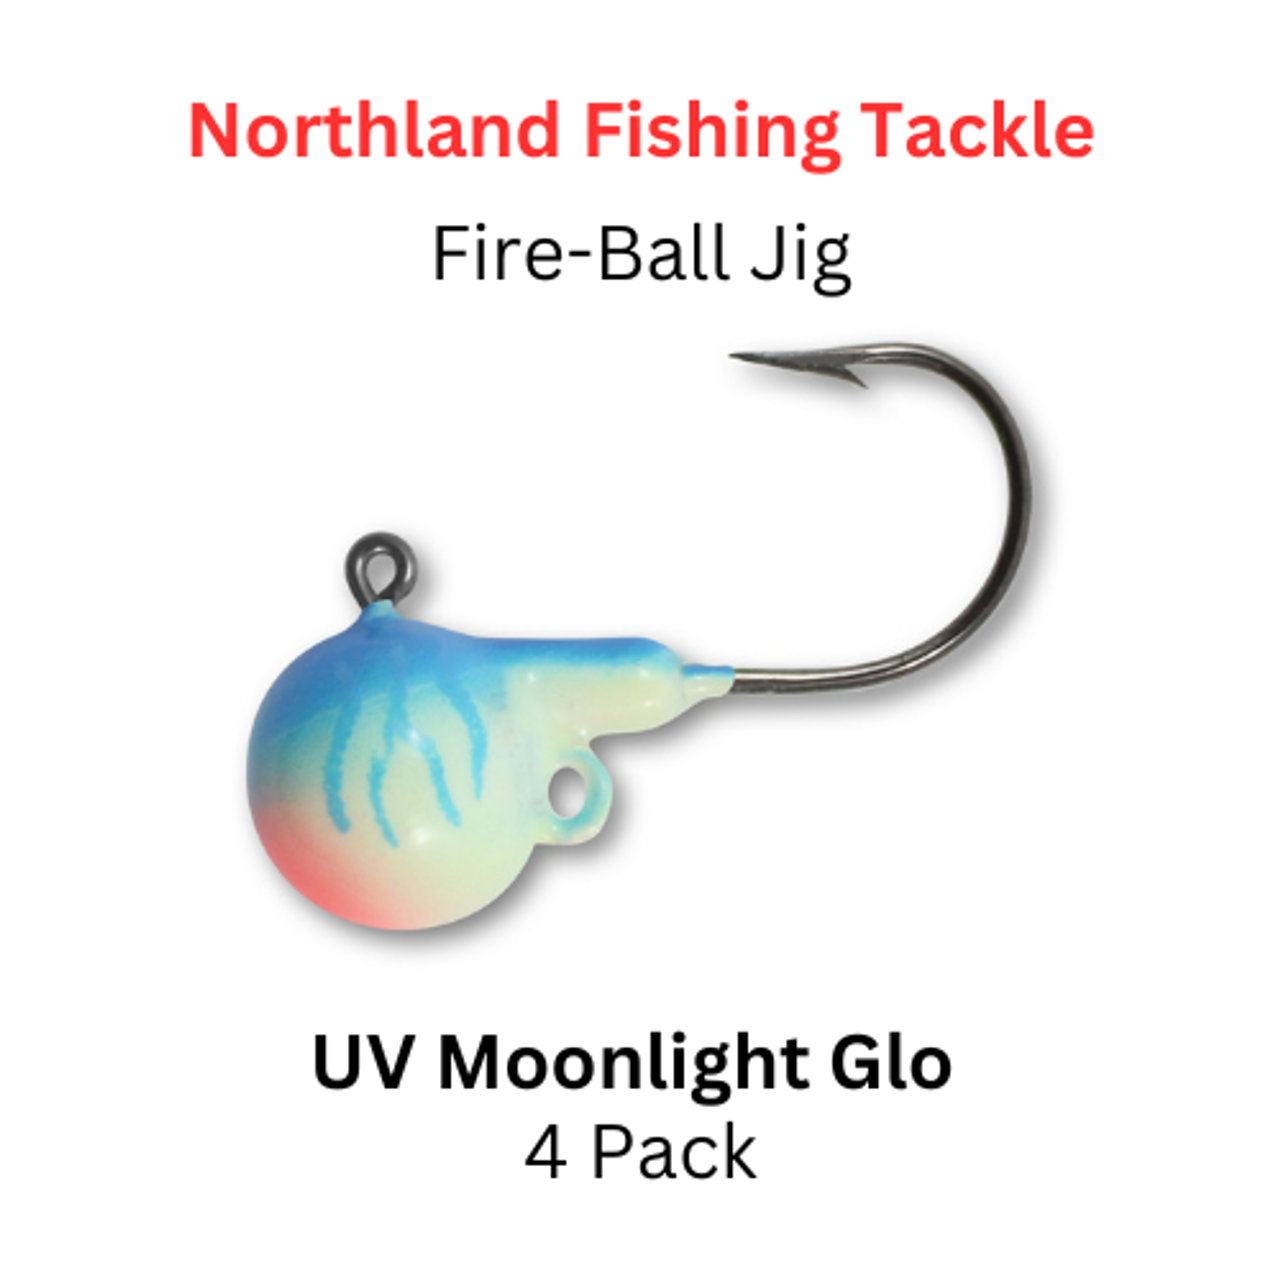 https://cdn11.bigcommerce.com/s-u9nbd/images/stencil/1280x1280/products/6425/16157/Northland_Fishing_Tackle_Fire-ball_jig_UV_Moonlight_Glo__59907.1678213156.png?c=2